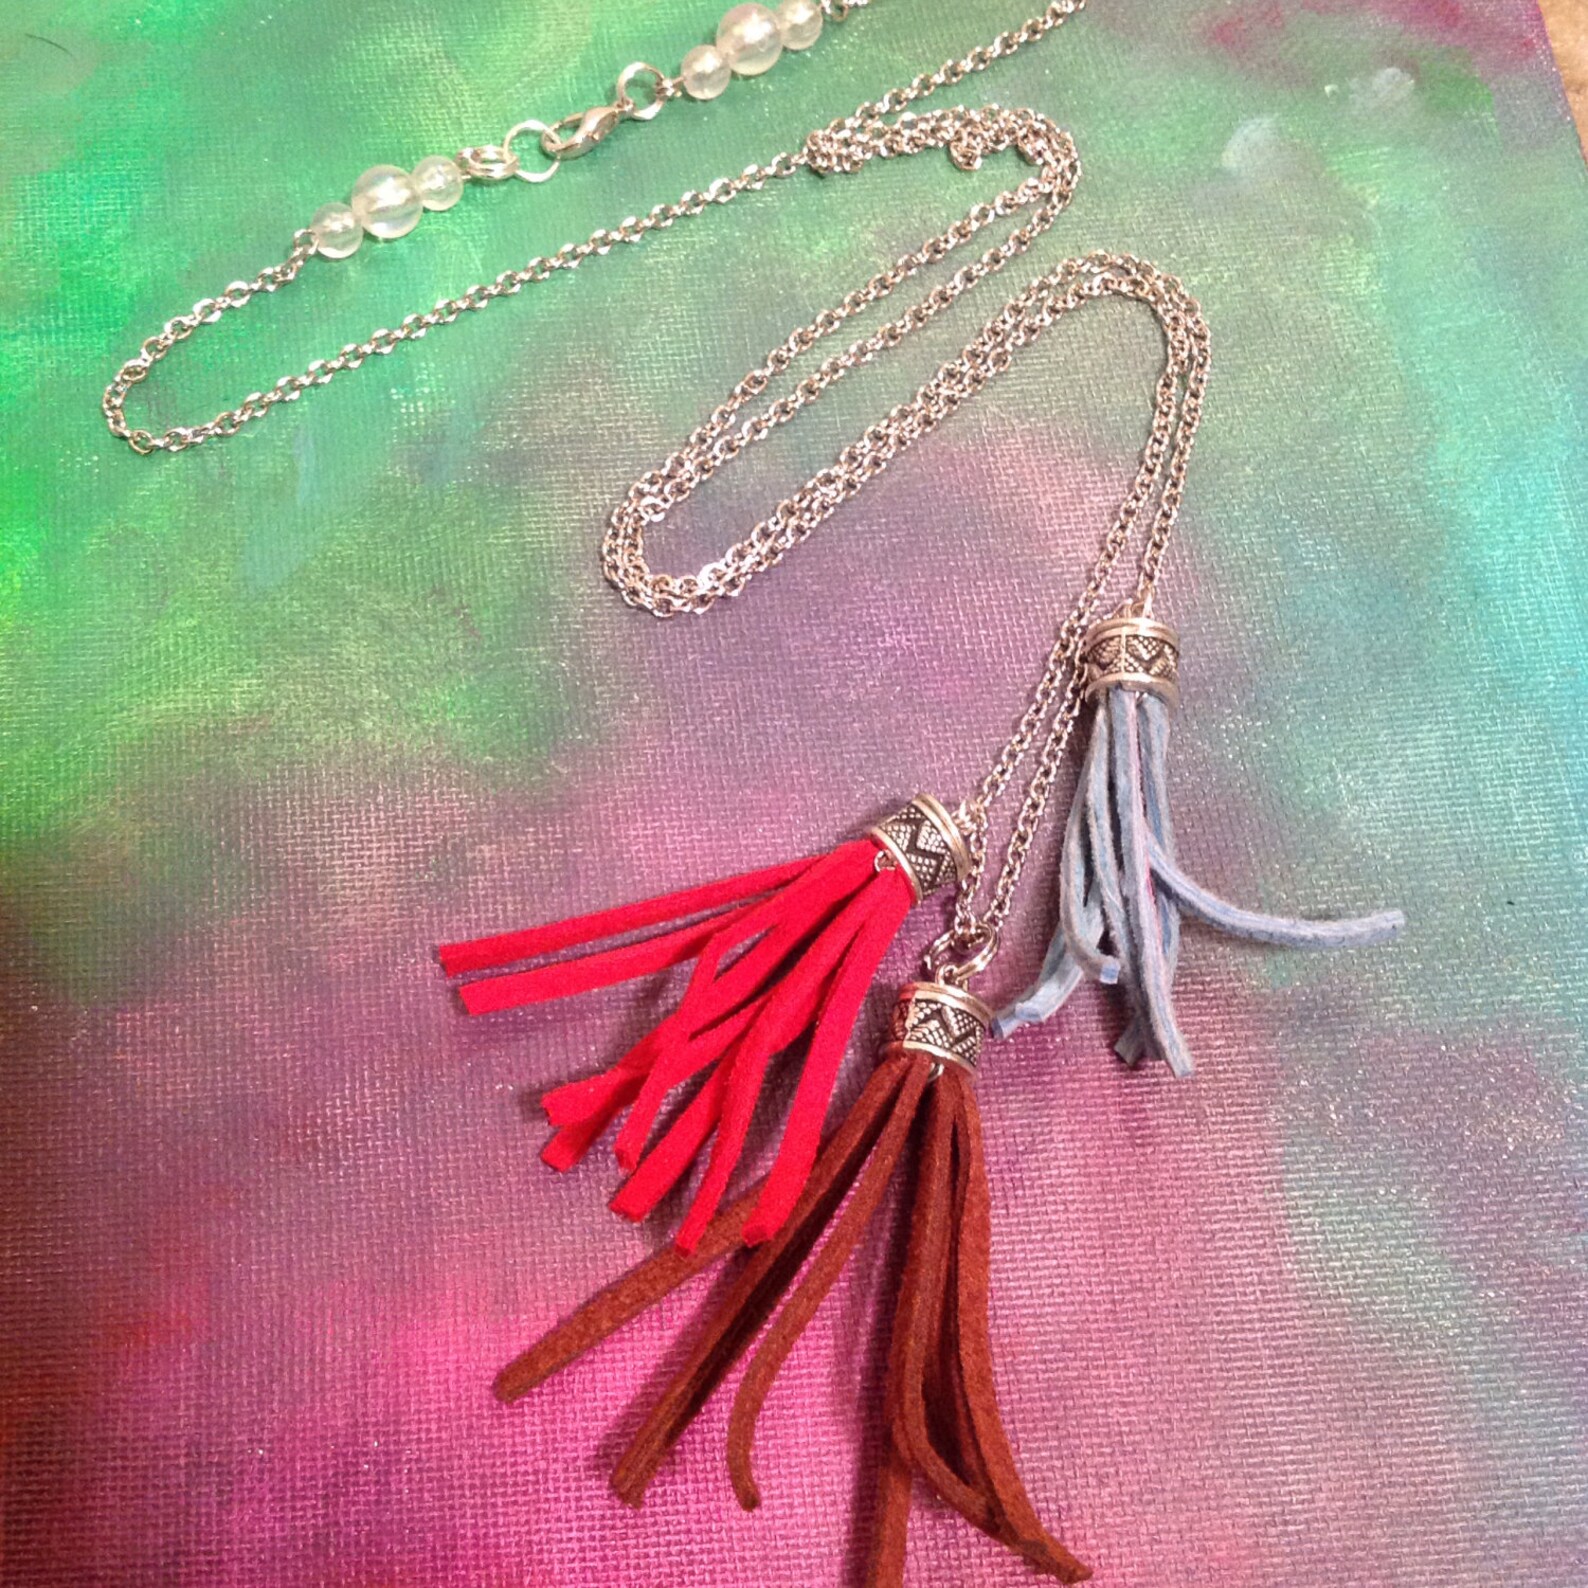 Long Tassle Necklace // Red Brown and Blue Necklace // Suede - Etsy